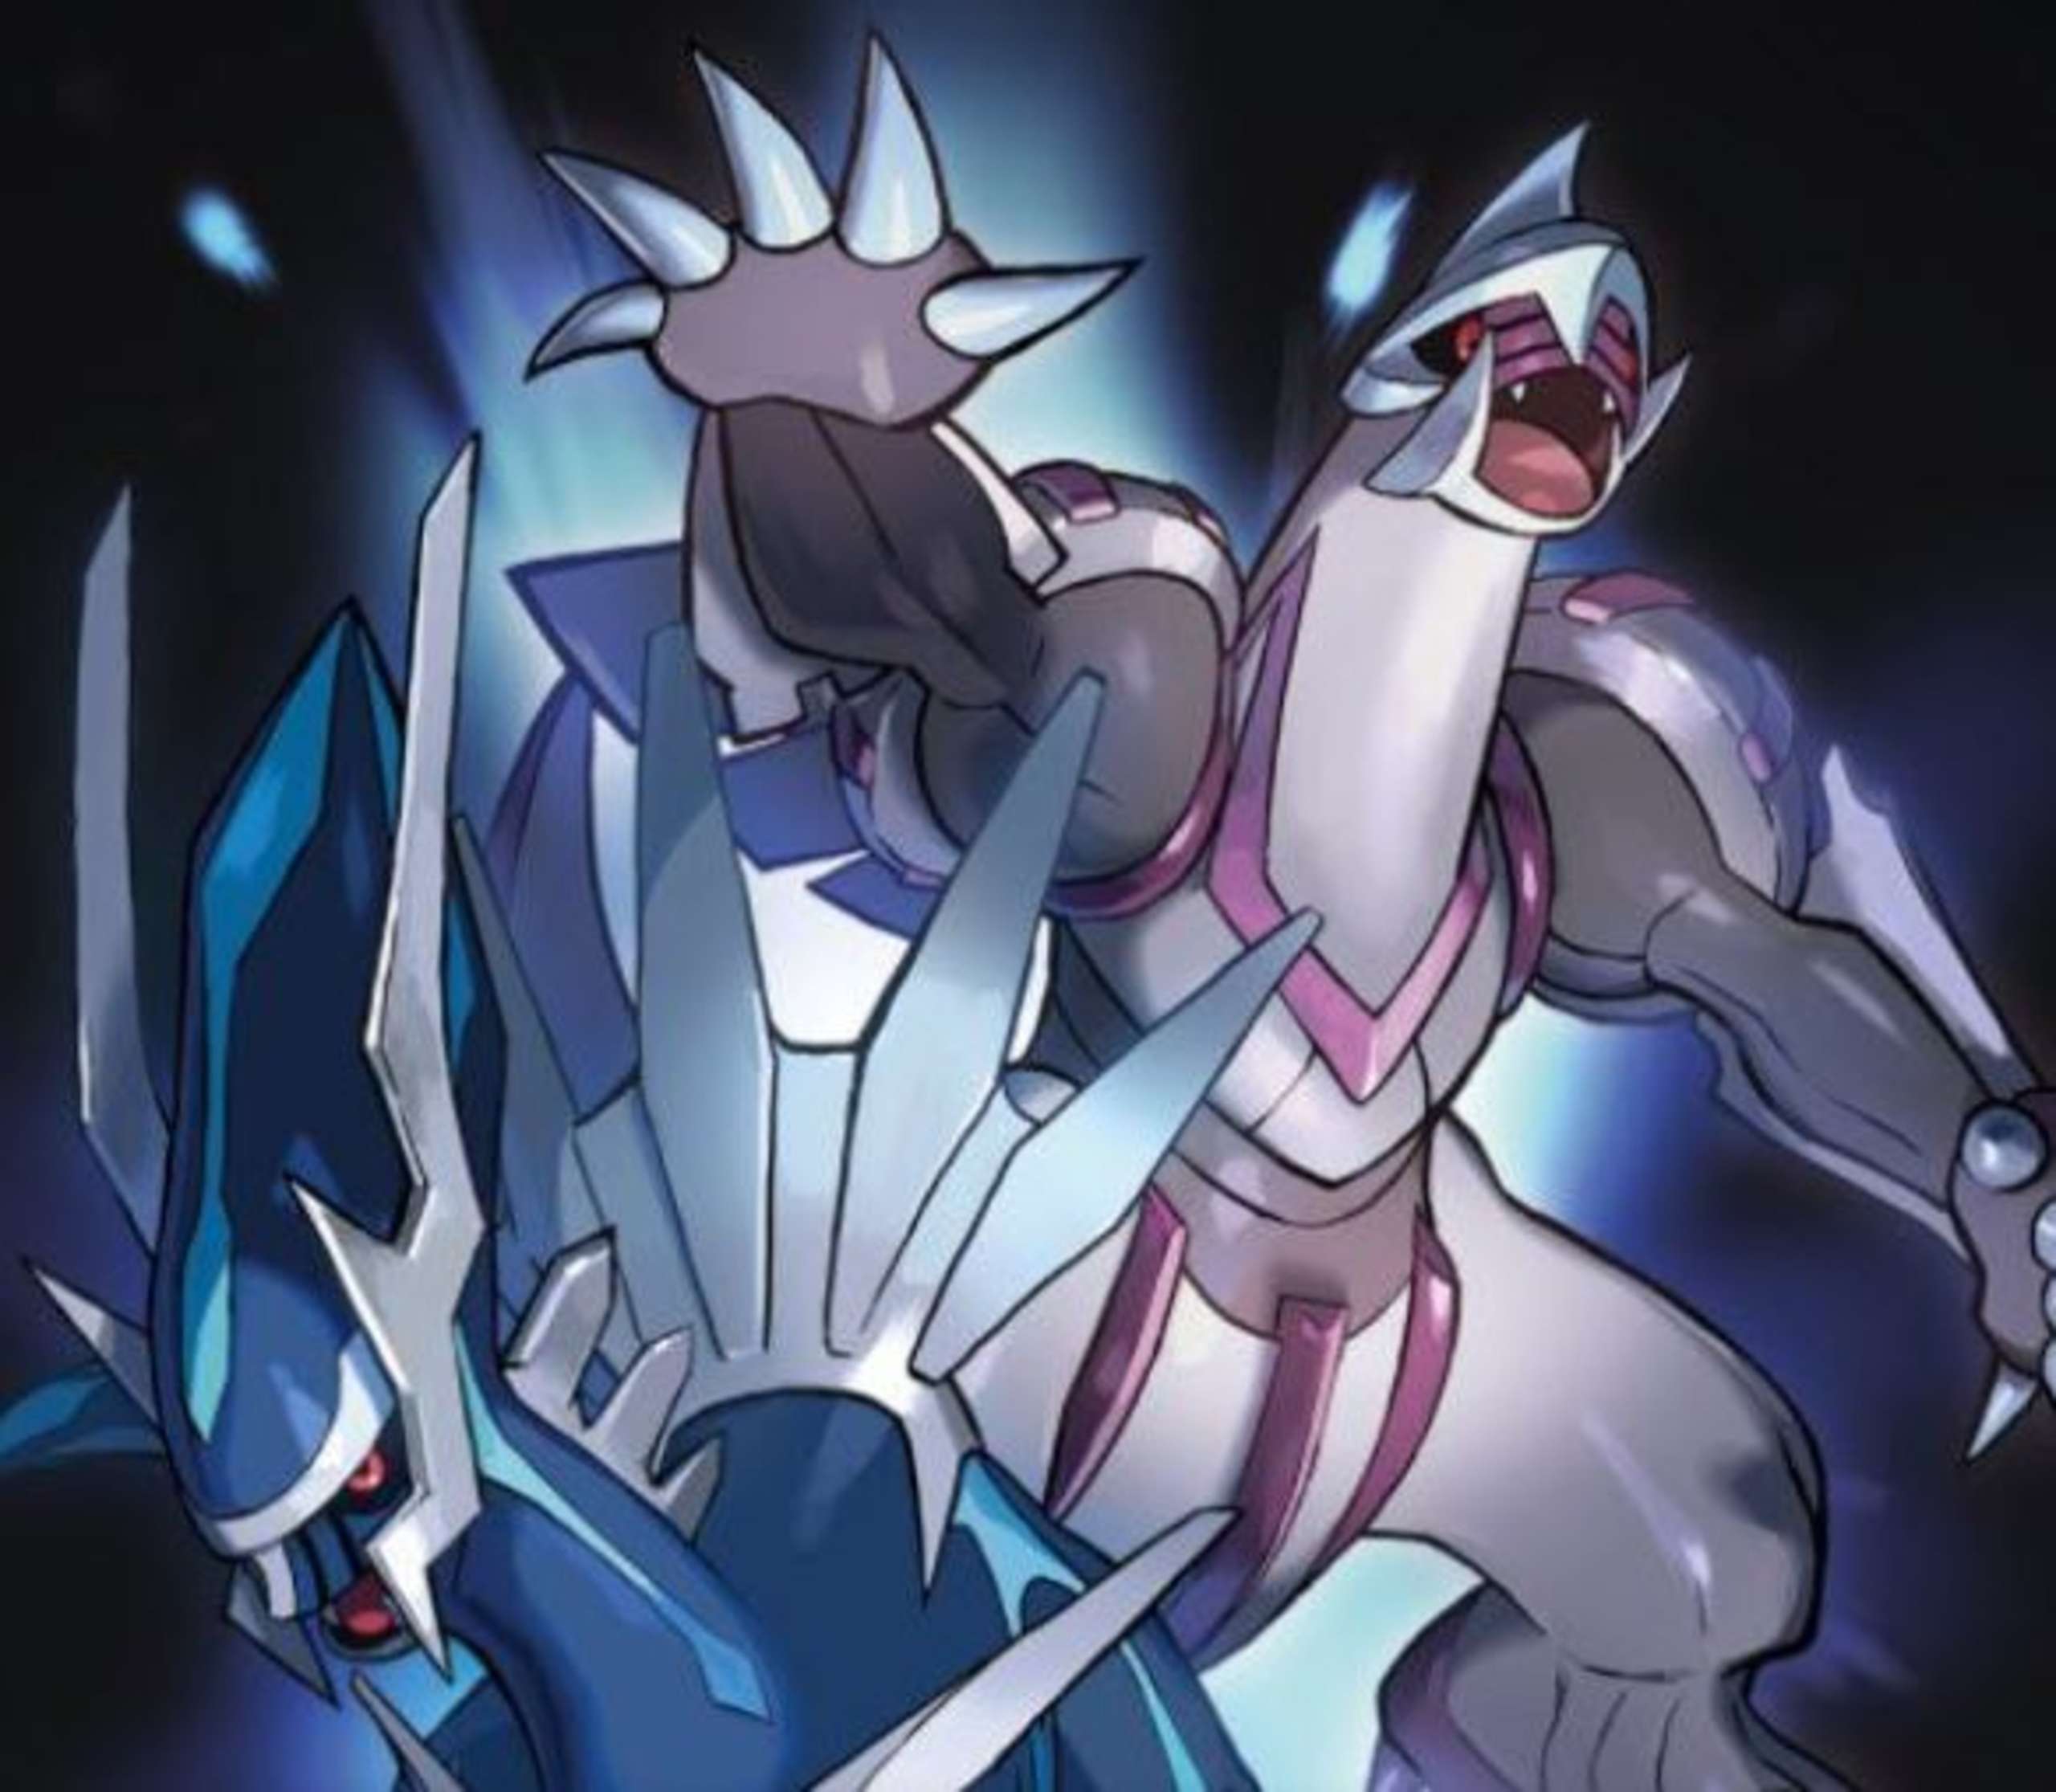 Recently, Fan Art Has Portrayed Dialga And Palkia, Two Of Sinnoh’s Legendary Pokémon, As Two Dinosaurs Engaged In A Massive Battle